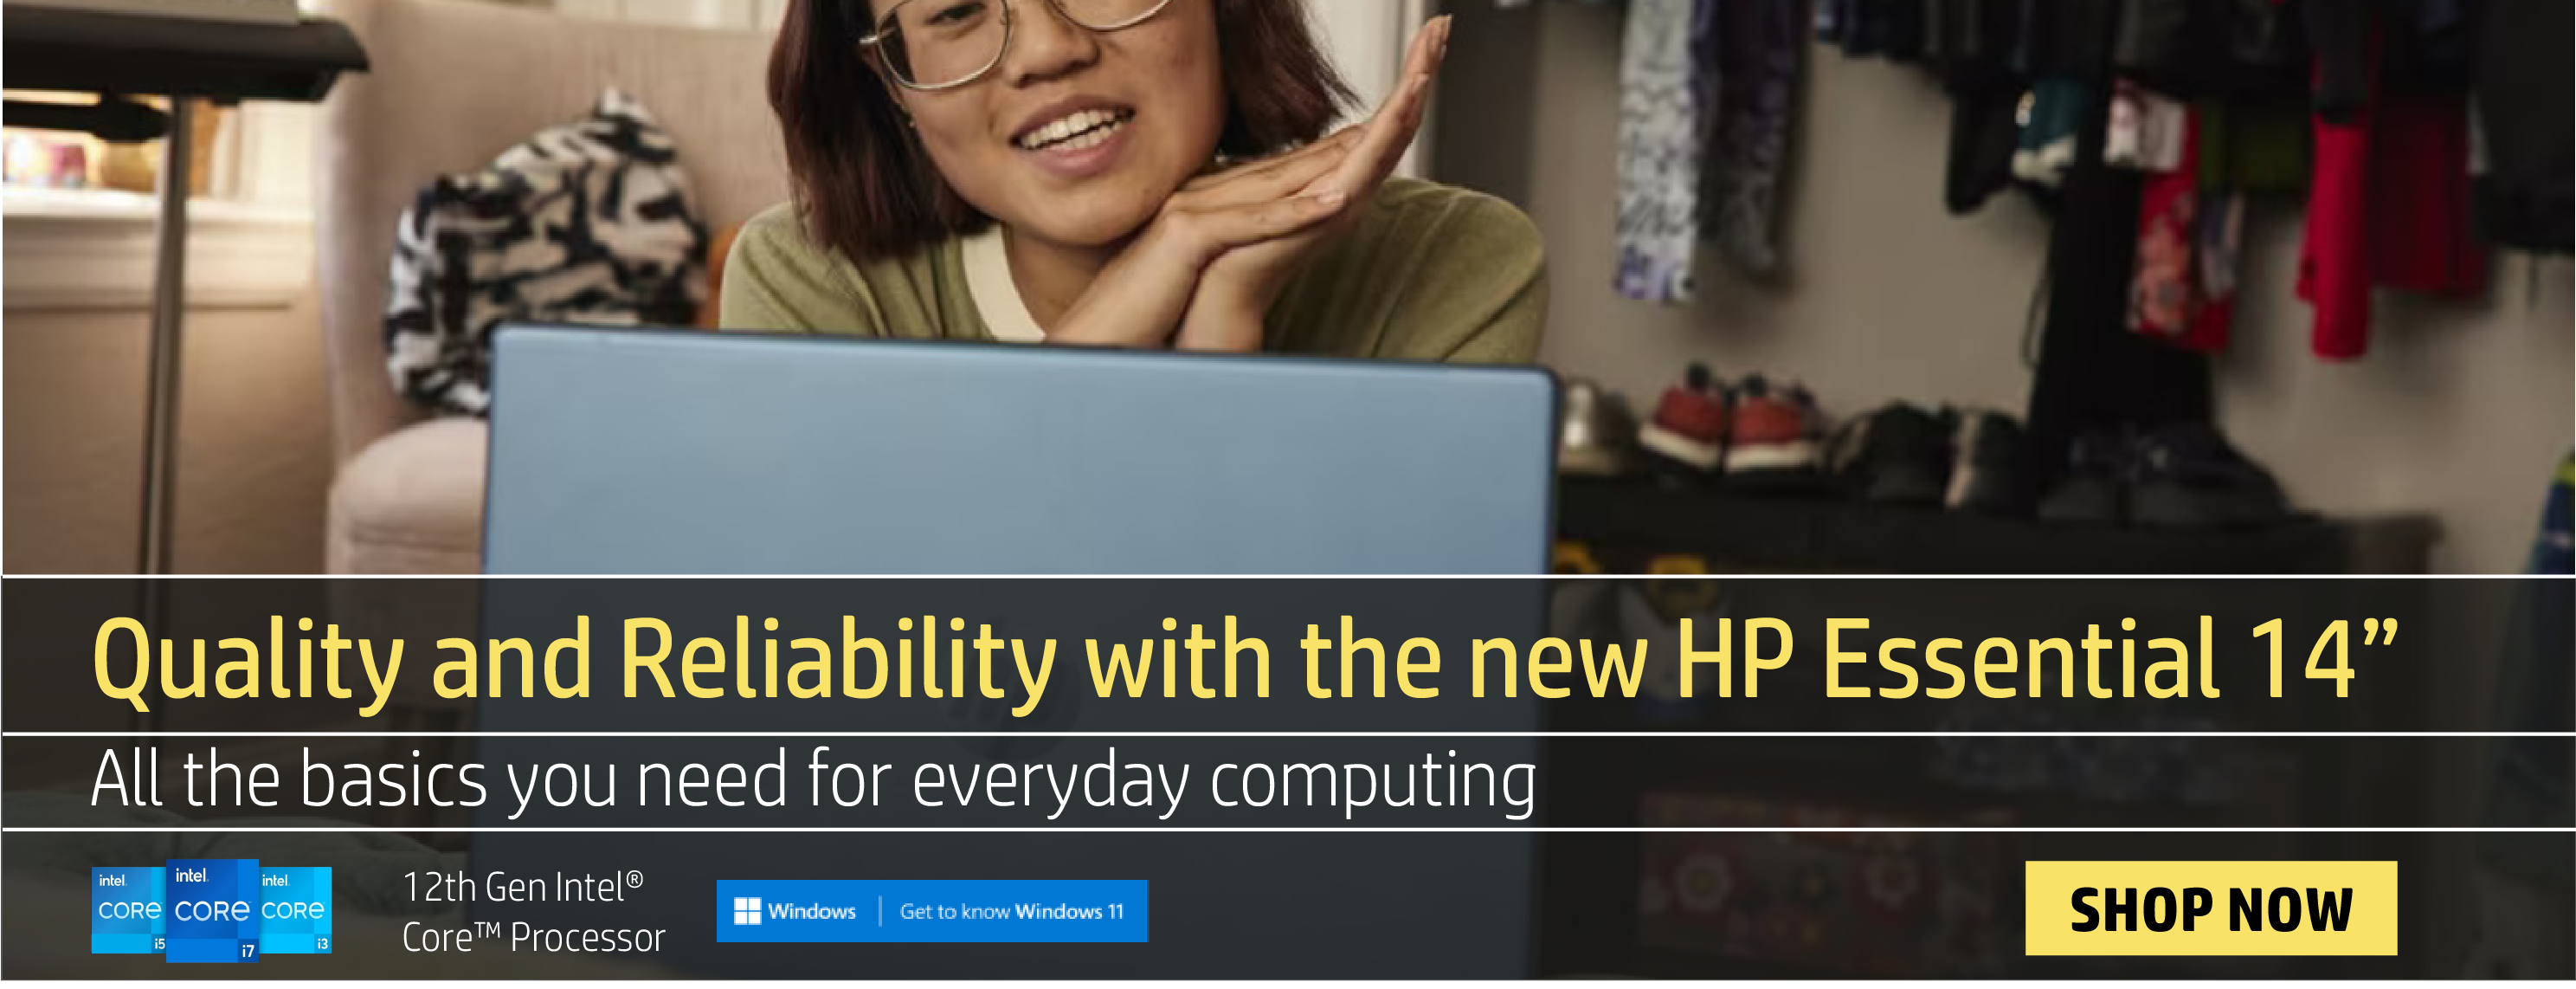 HP_Essential_14_Landing_Page